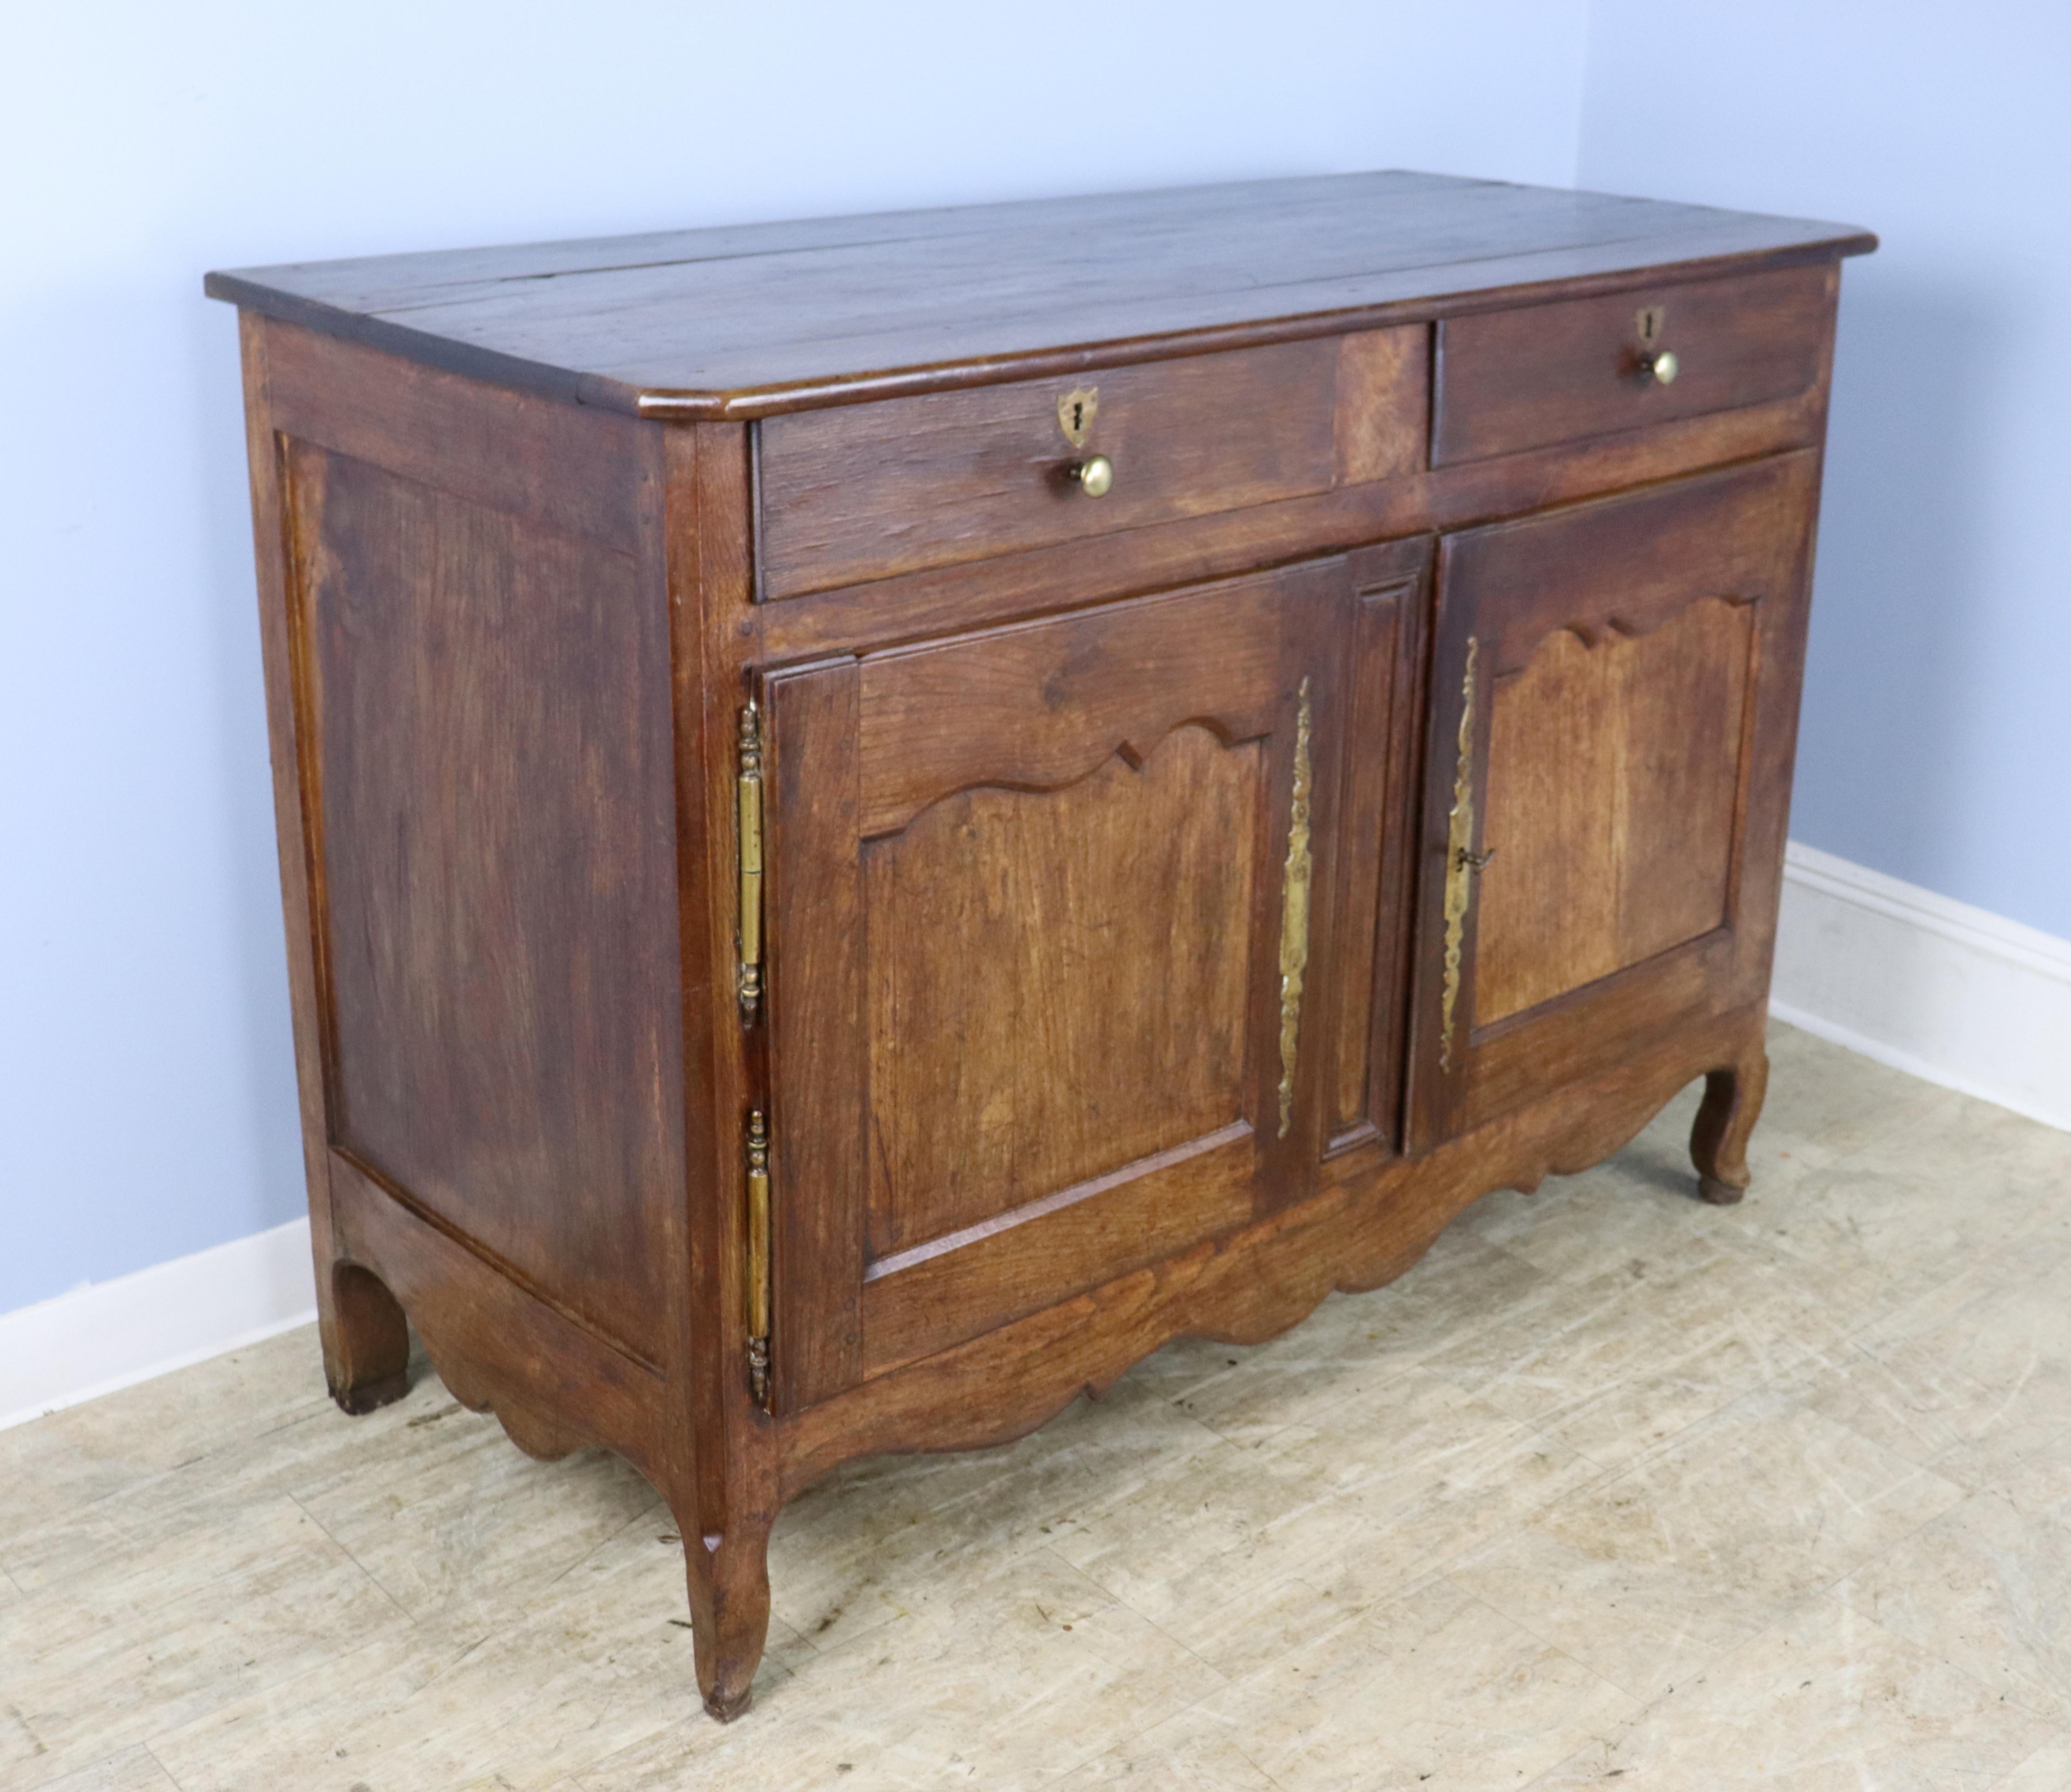 An antique country buffet with a scalloped apron from France. The chestnut has exceptional graining with a rich patina. See the beautiful chestnut wood used even on the top and doors. Lovely escutcheons and hinges. Two wide drawers above a cabinet